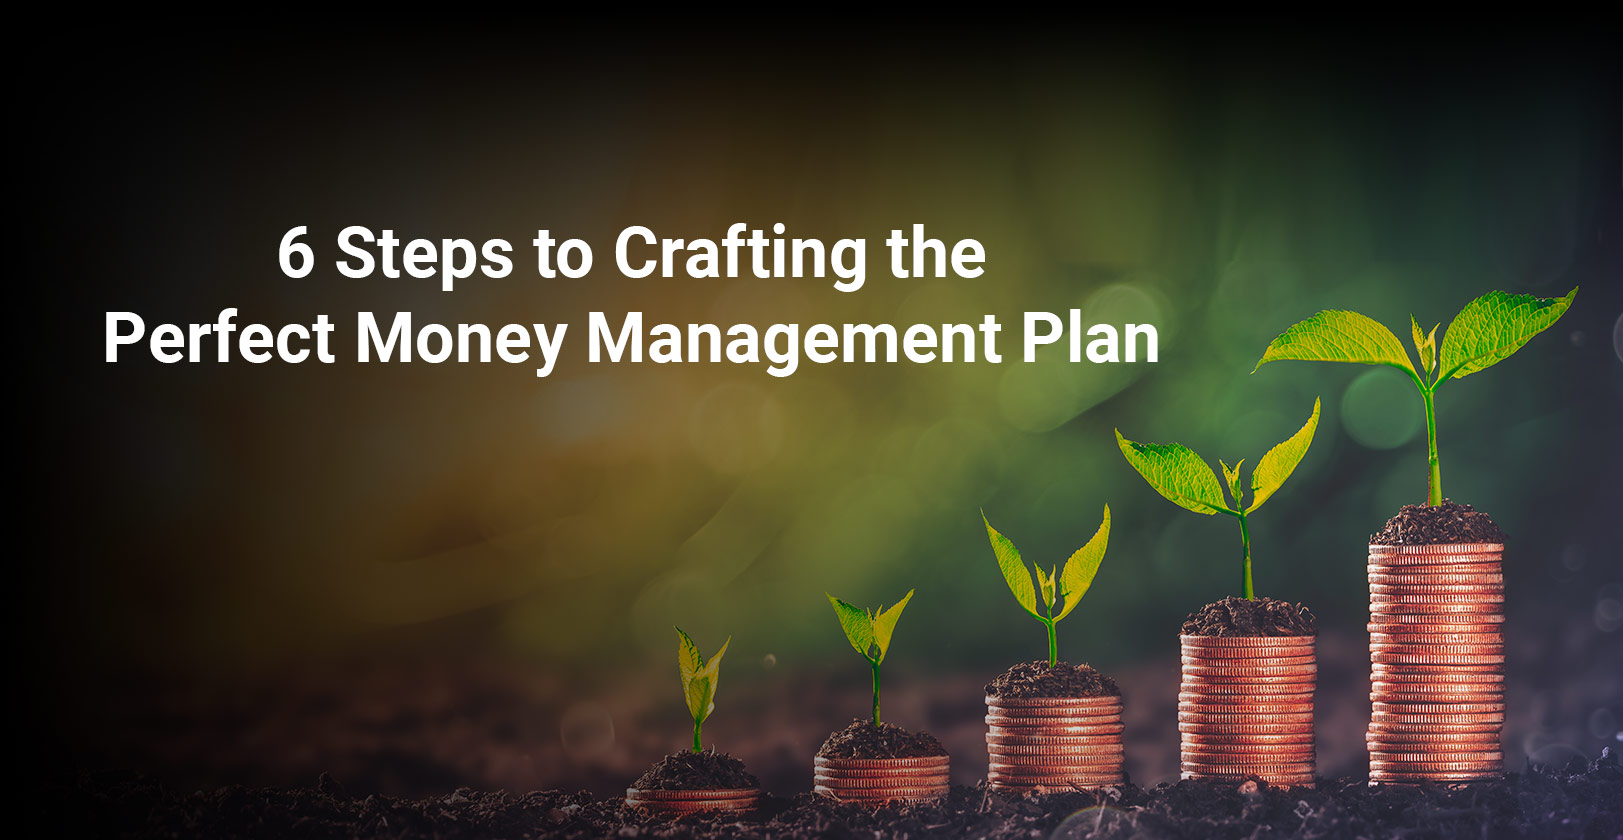 6 Steps to Crafting the Perfect Money Management Plan